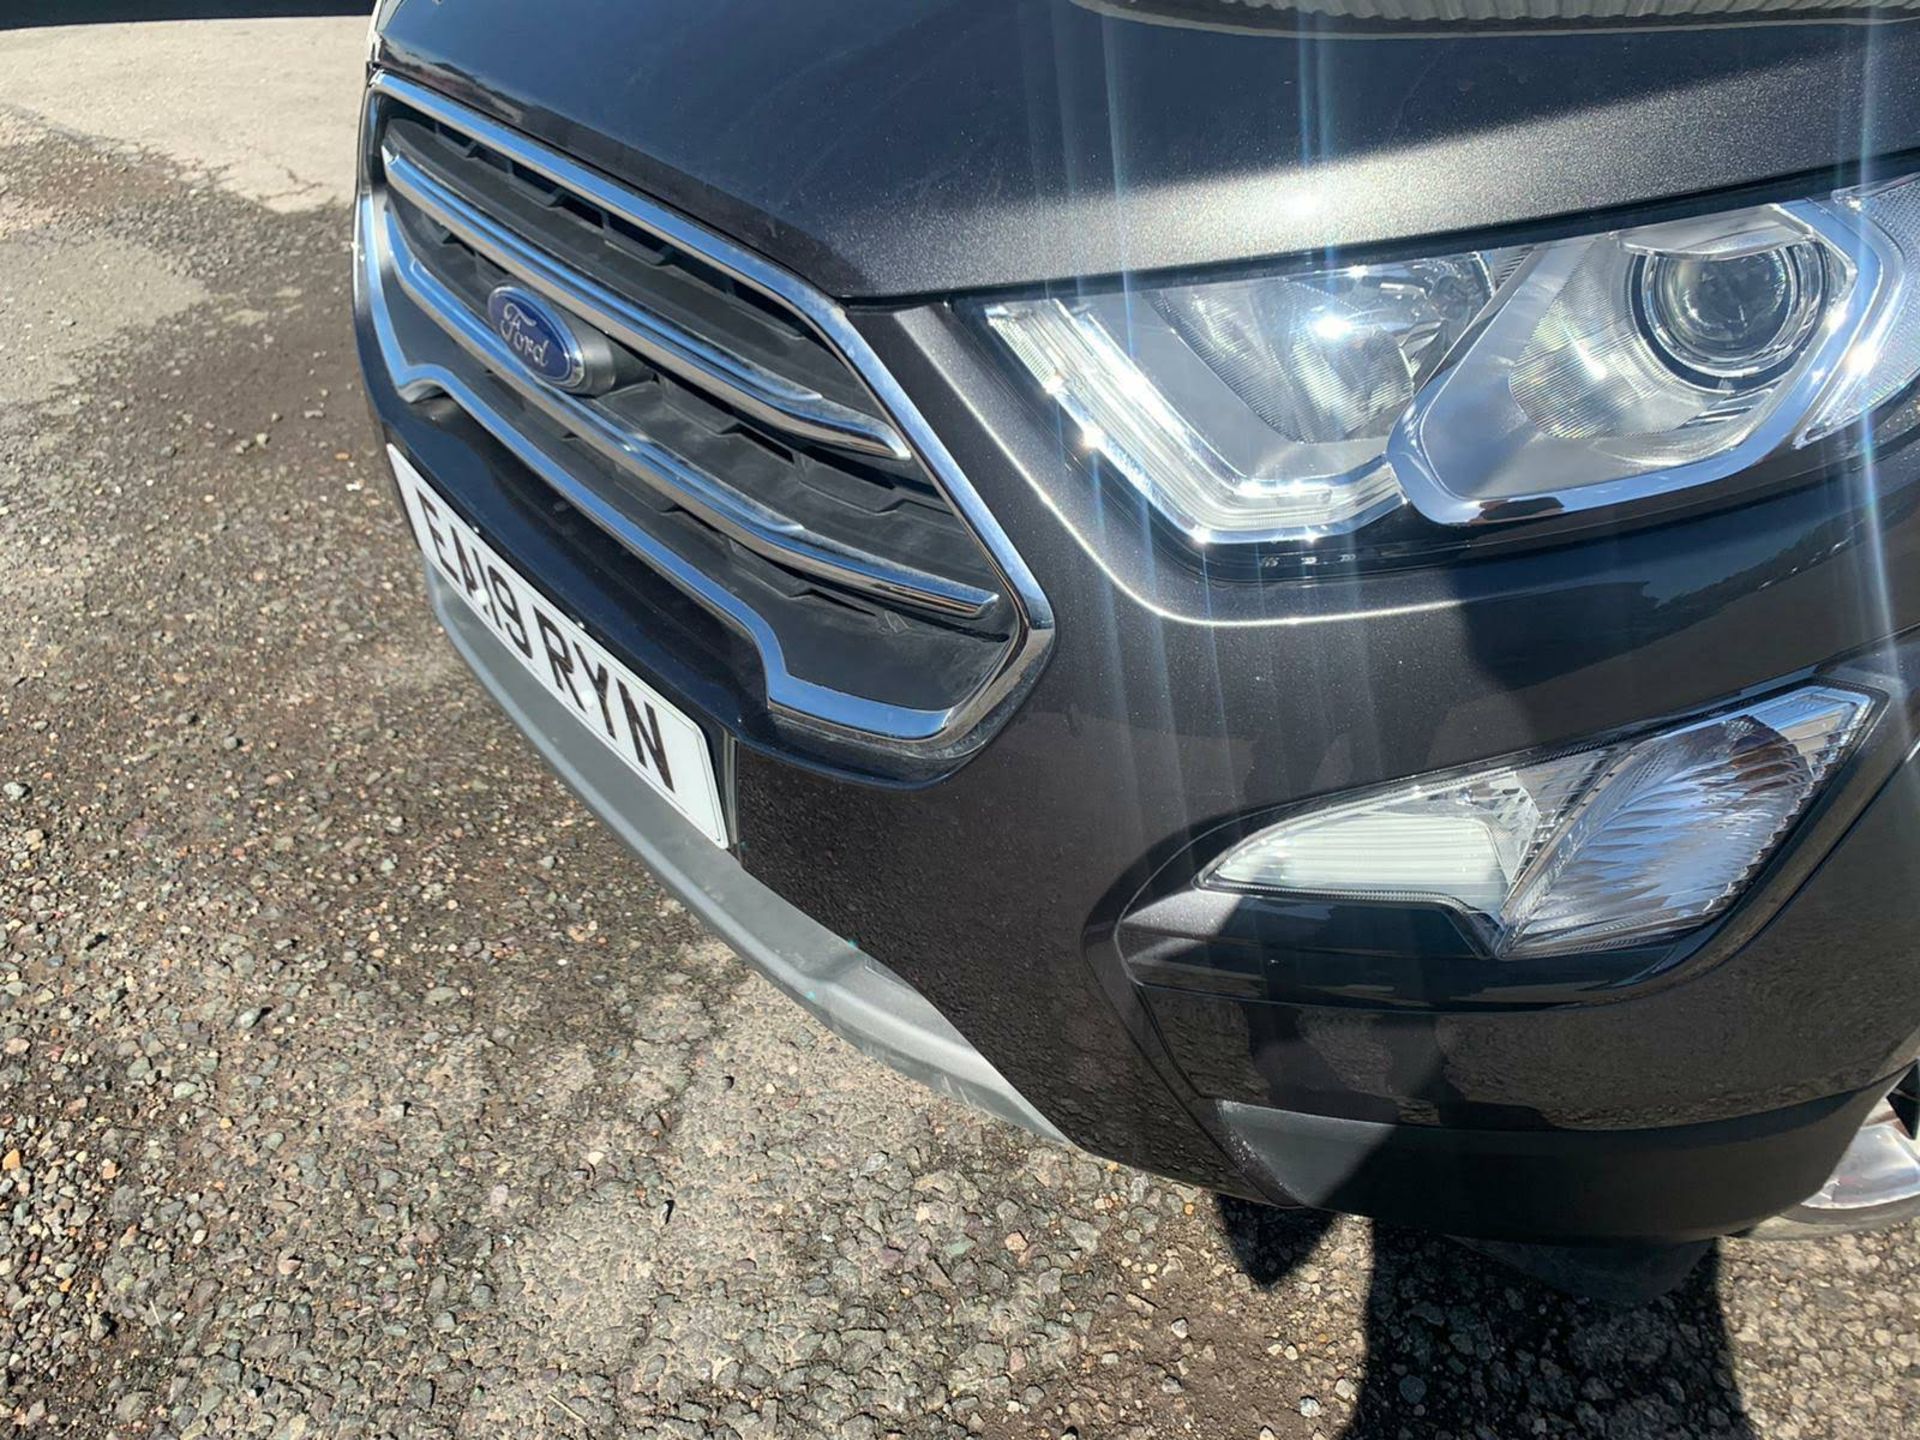 2019/19 REG FORD ECOSPORT TITANIUM 998CC PETROL 125BHP 5DR, SHOWING 0 FORMER KEEPERS *NO VAT* - Image 3 of 15